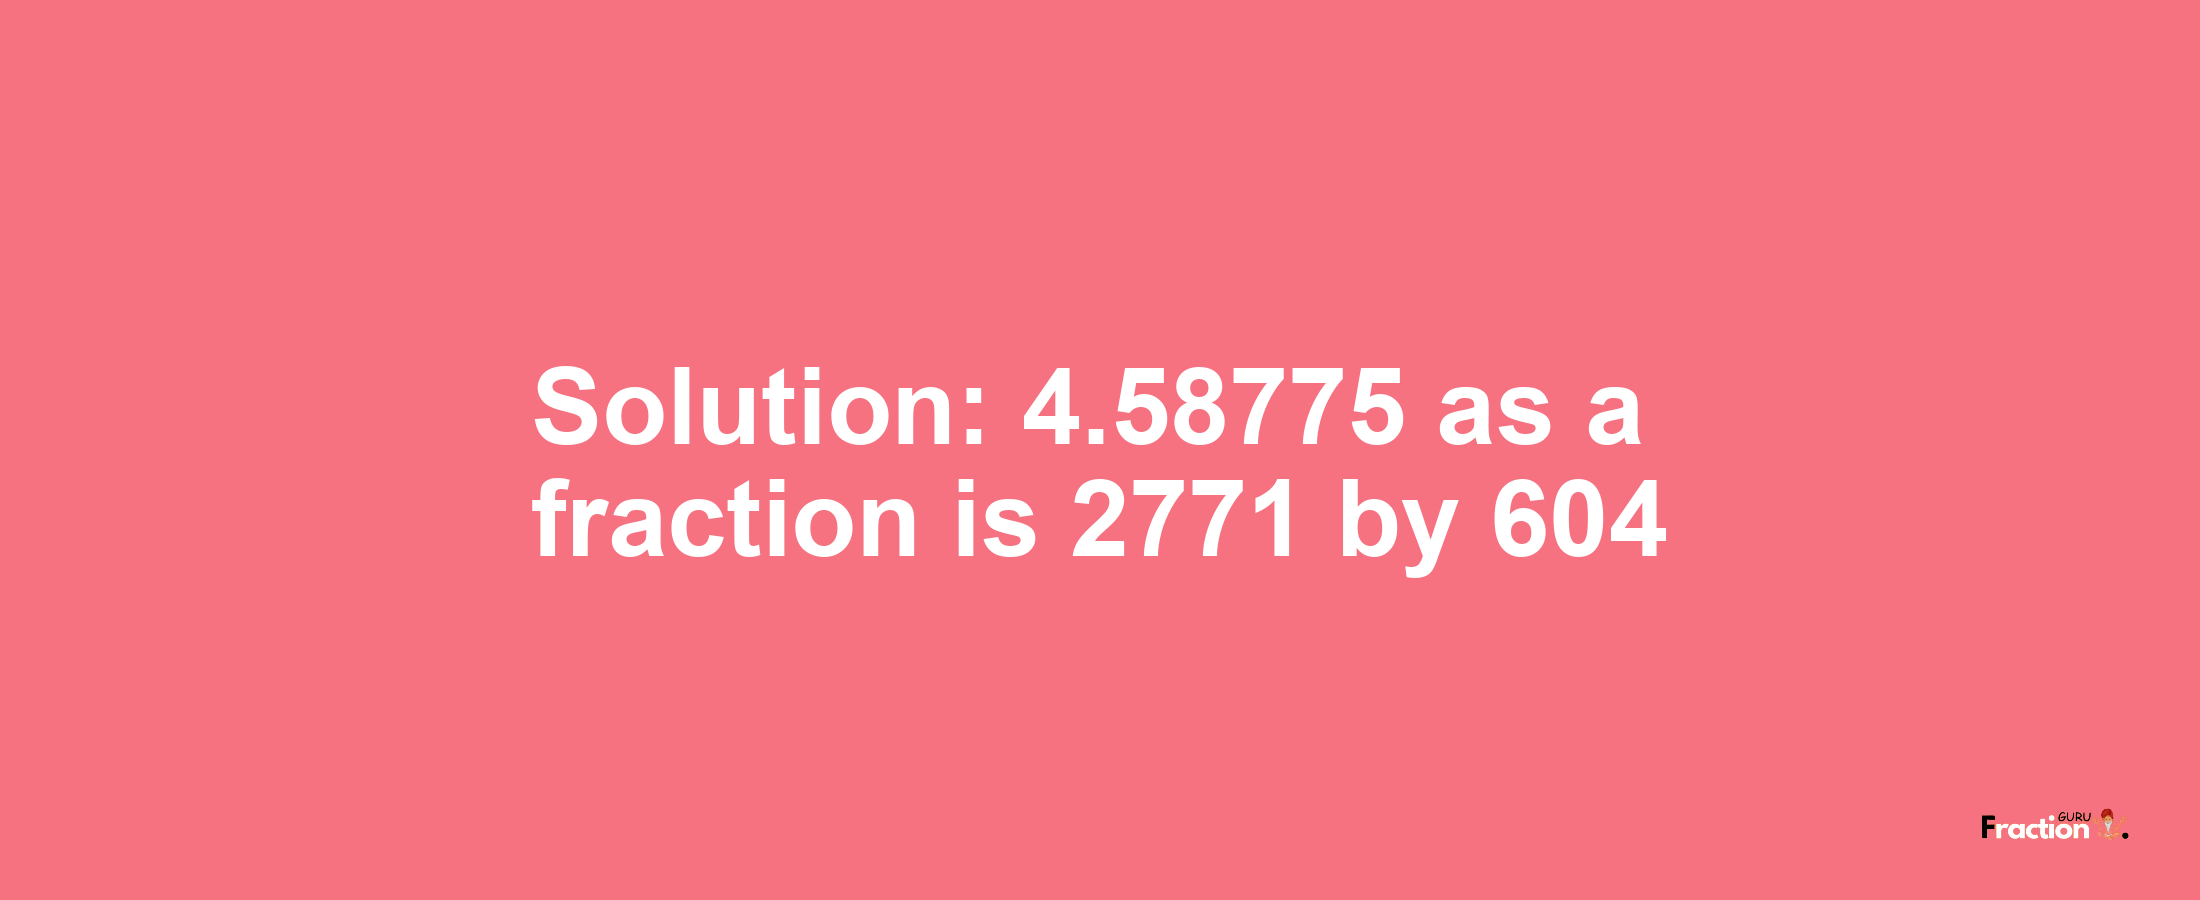 Solution:4.58775 as a fraction is 2771/604